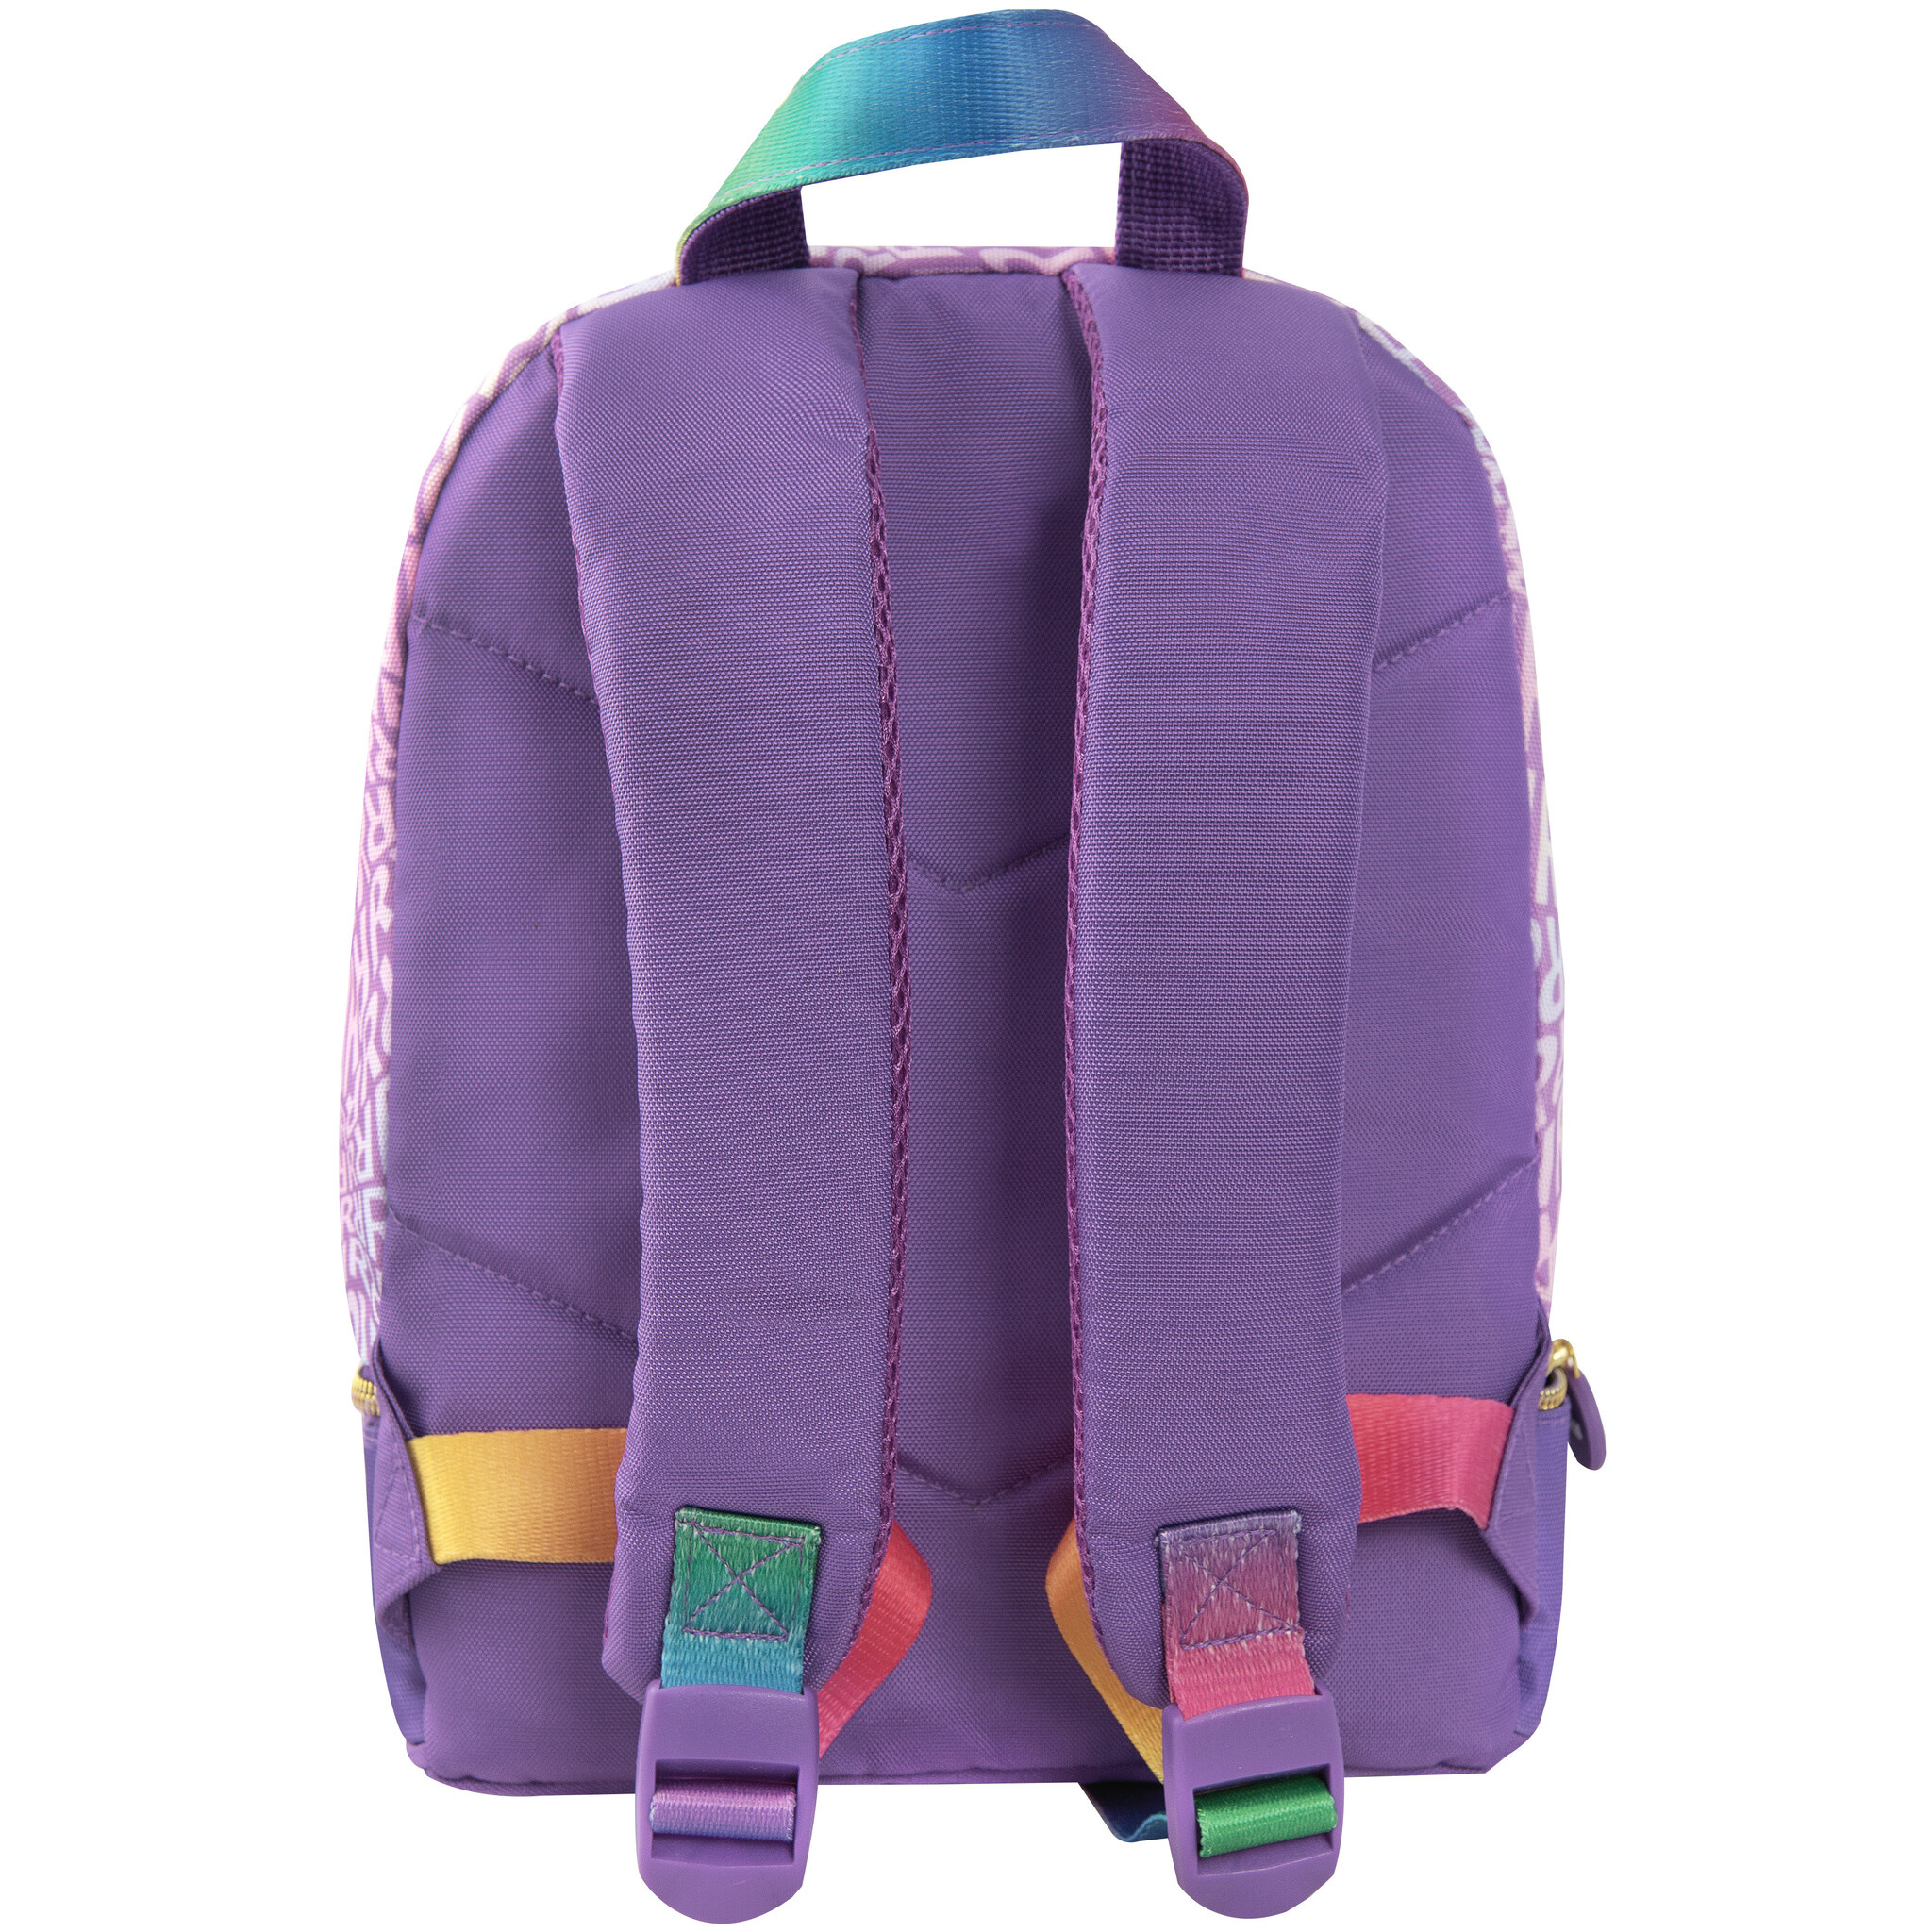 Rainbow High Toddler backpack, Shine - 30 x 23 x 10 cm - Polyester